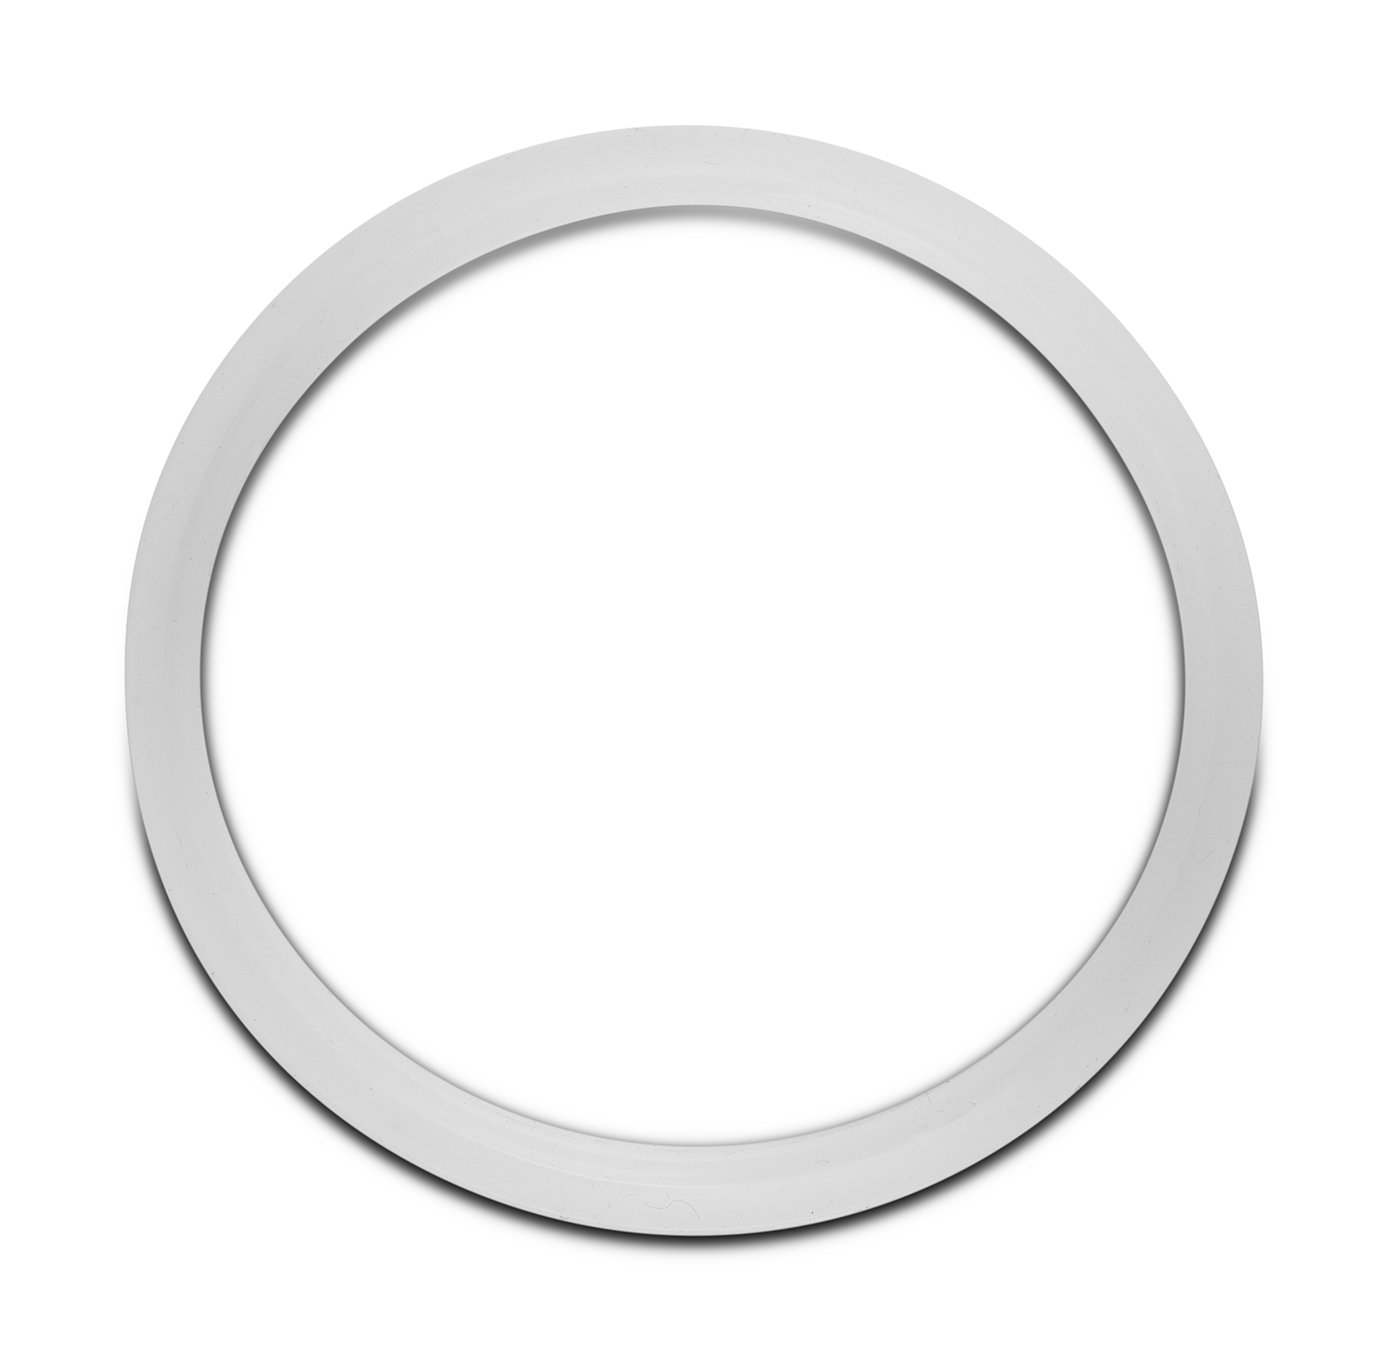 Replacement Gasket for Dutch Weave Sintered Filter Disks - Silicone New Products BVV 2" 